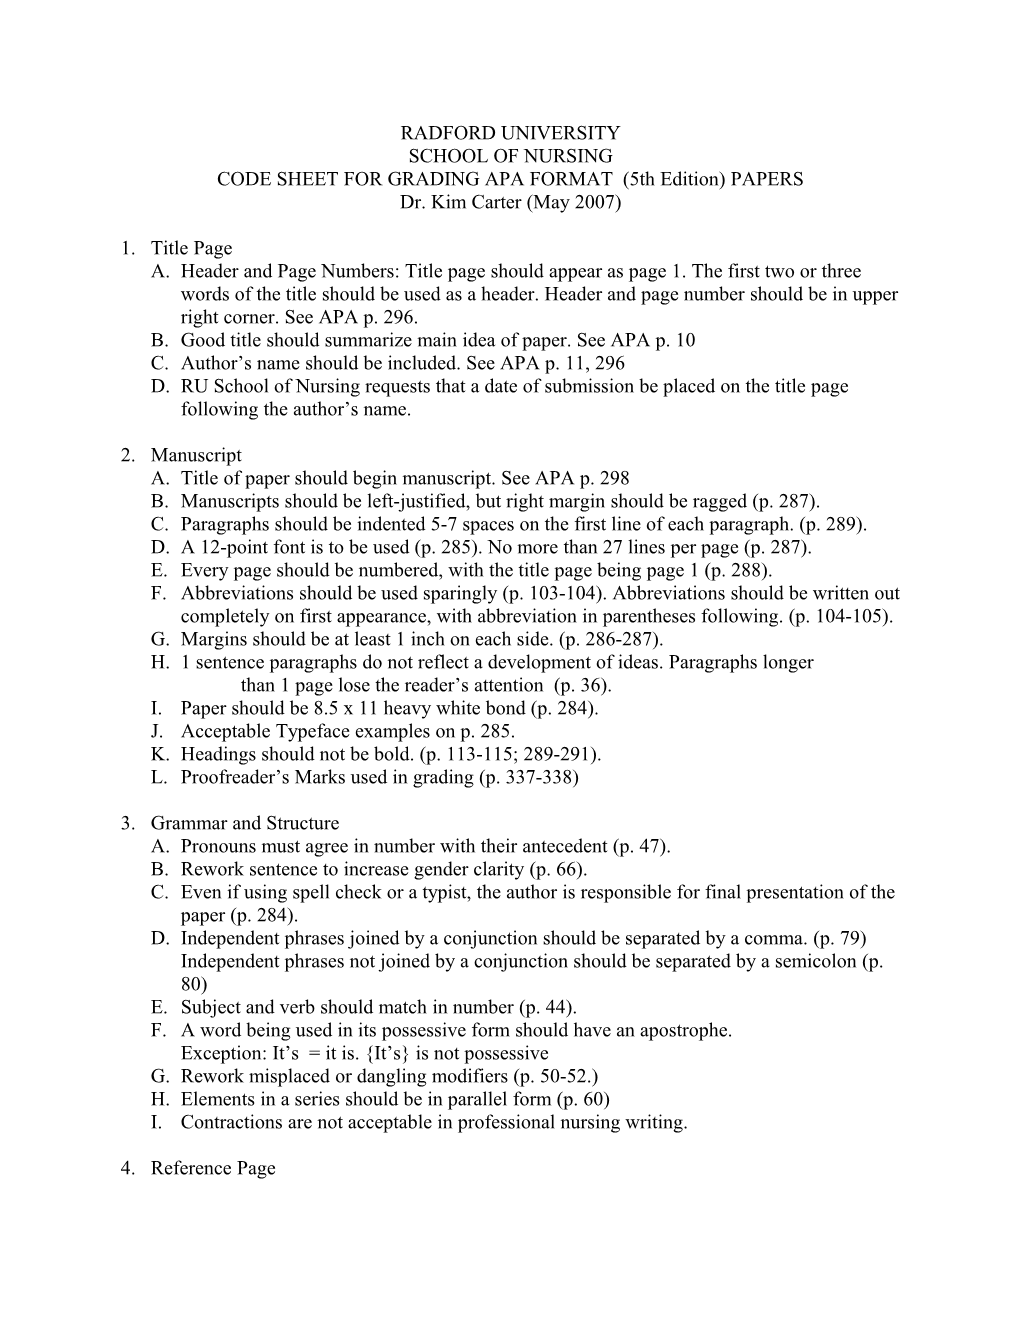 CODE SHEET for GRADING APA FORMAT (5Th Edition) PAPERS